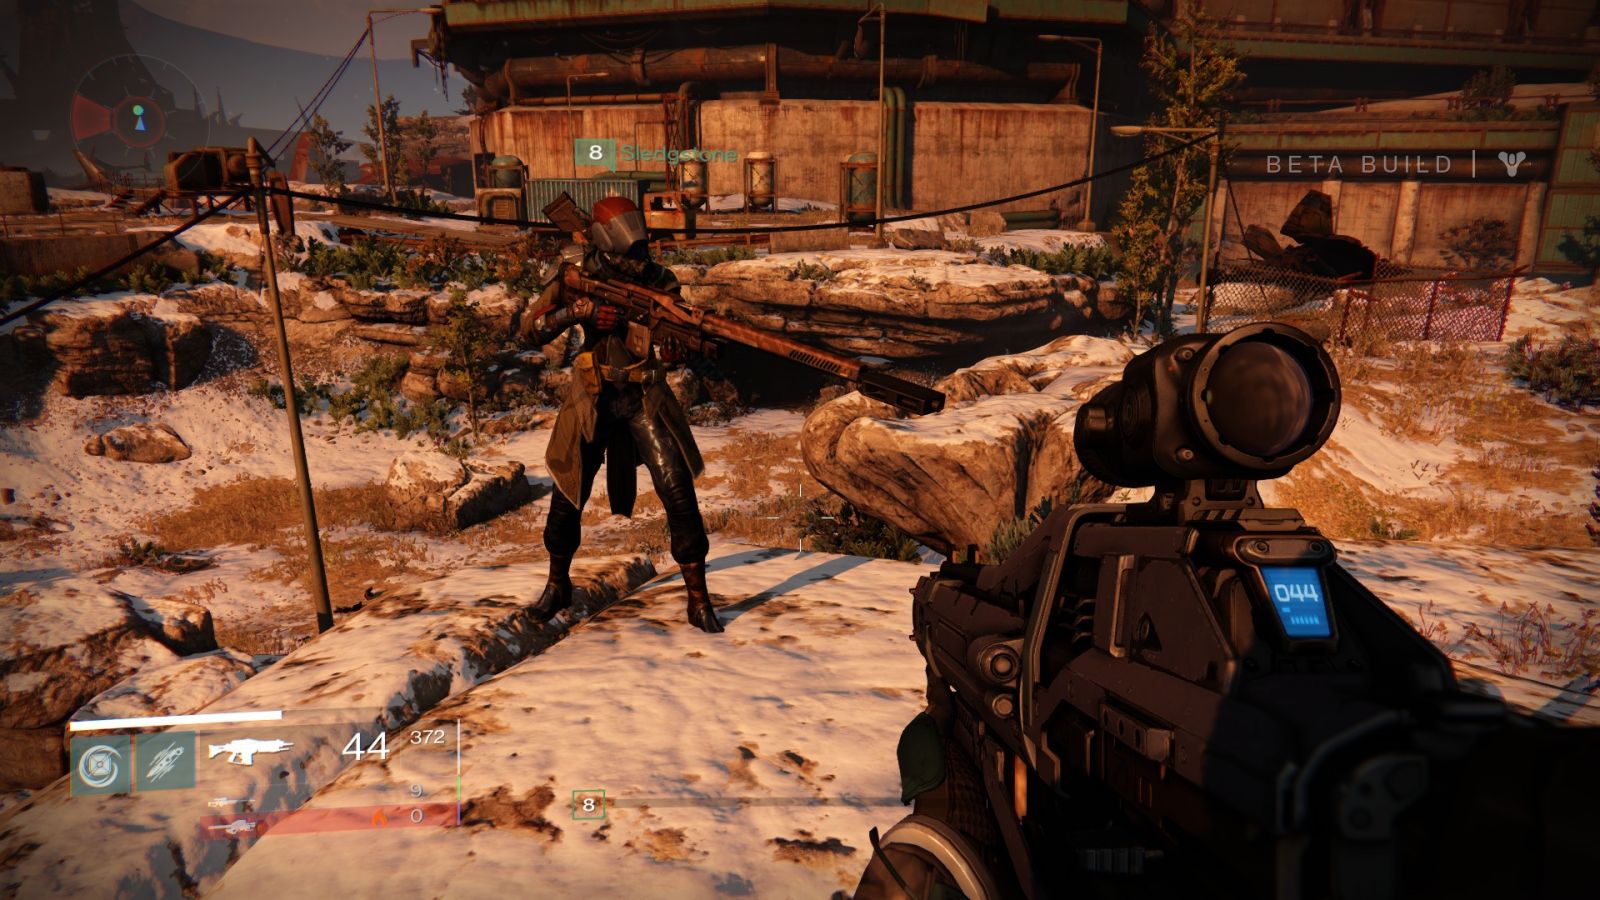 Pictures from the Destiny Beta